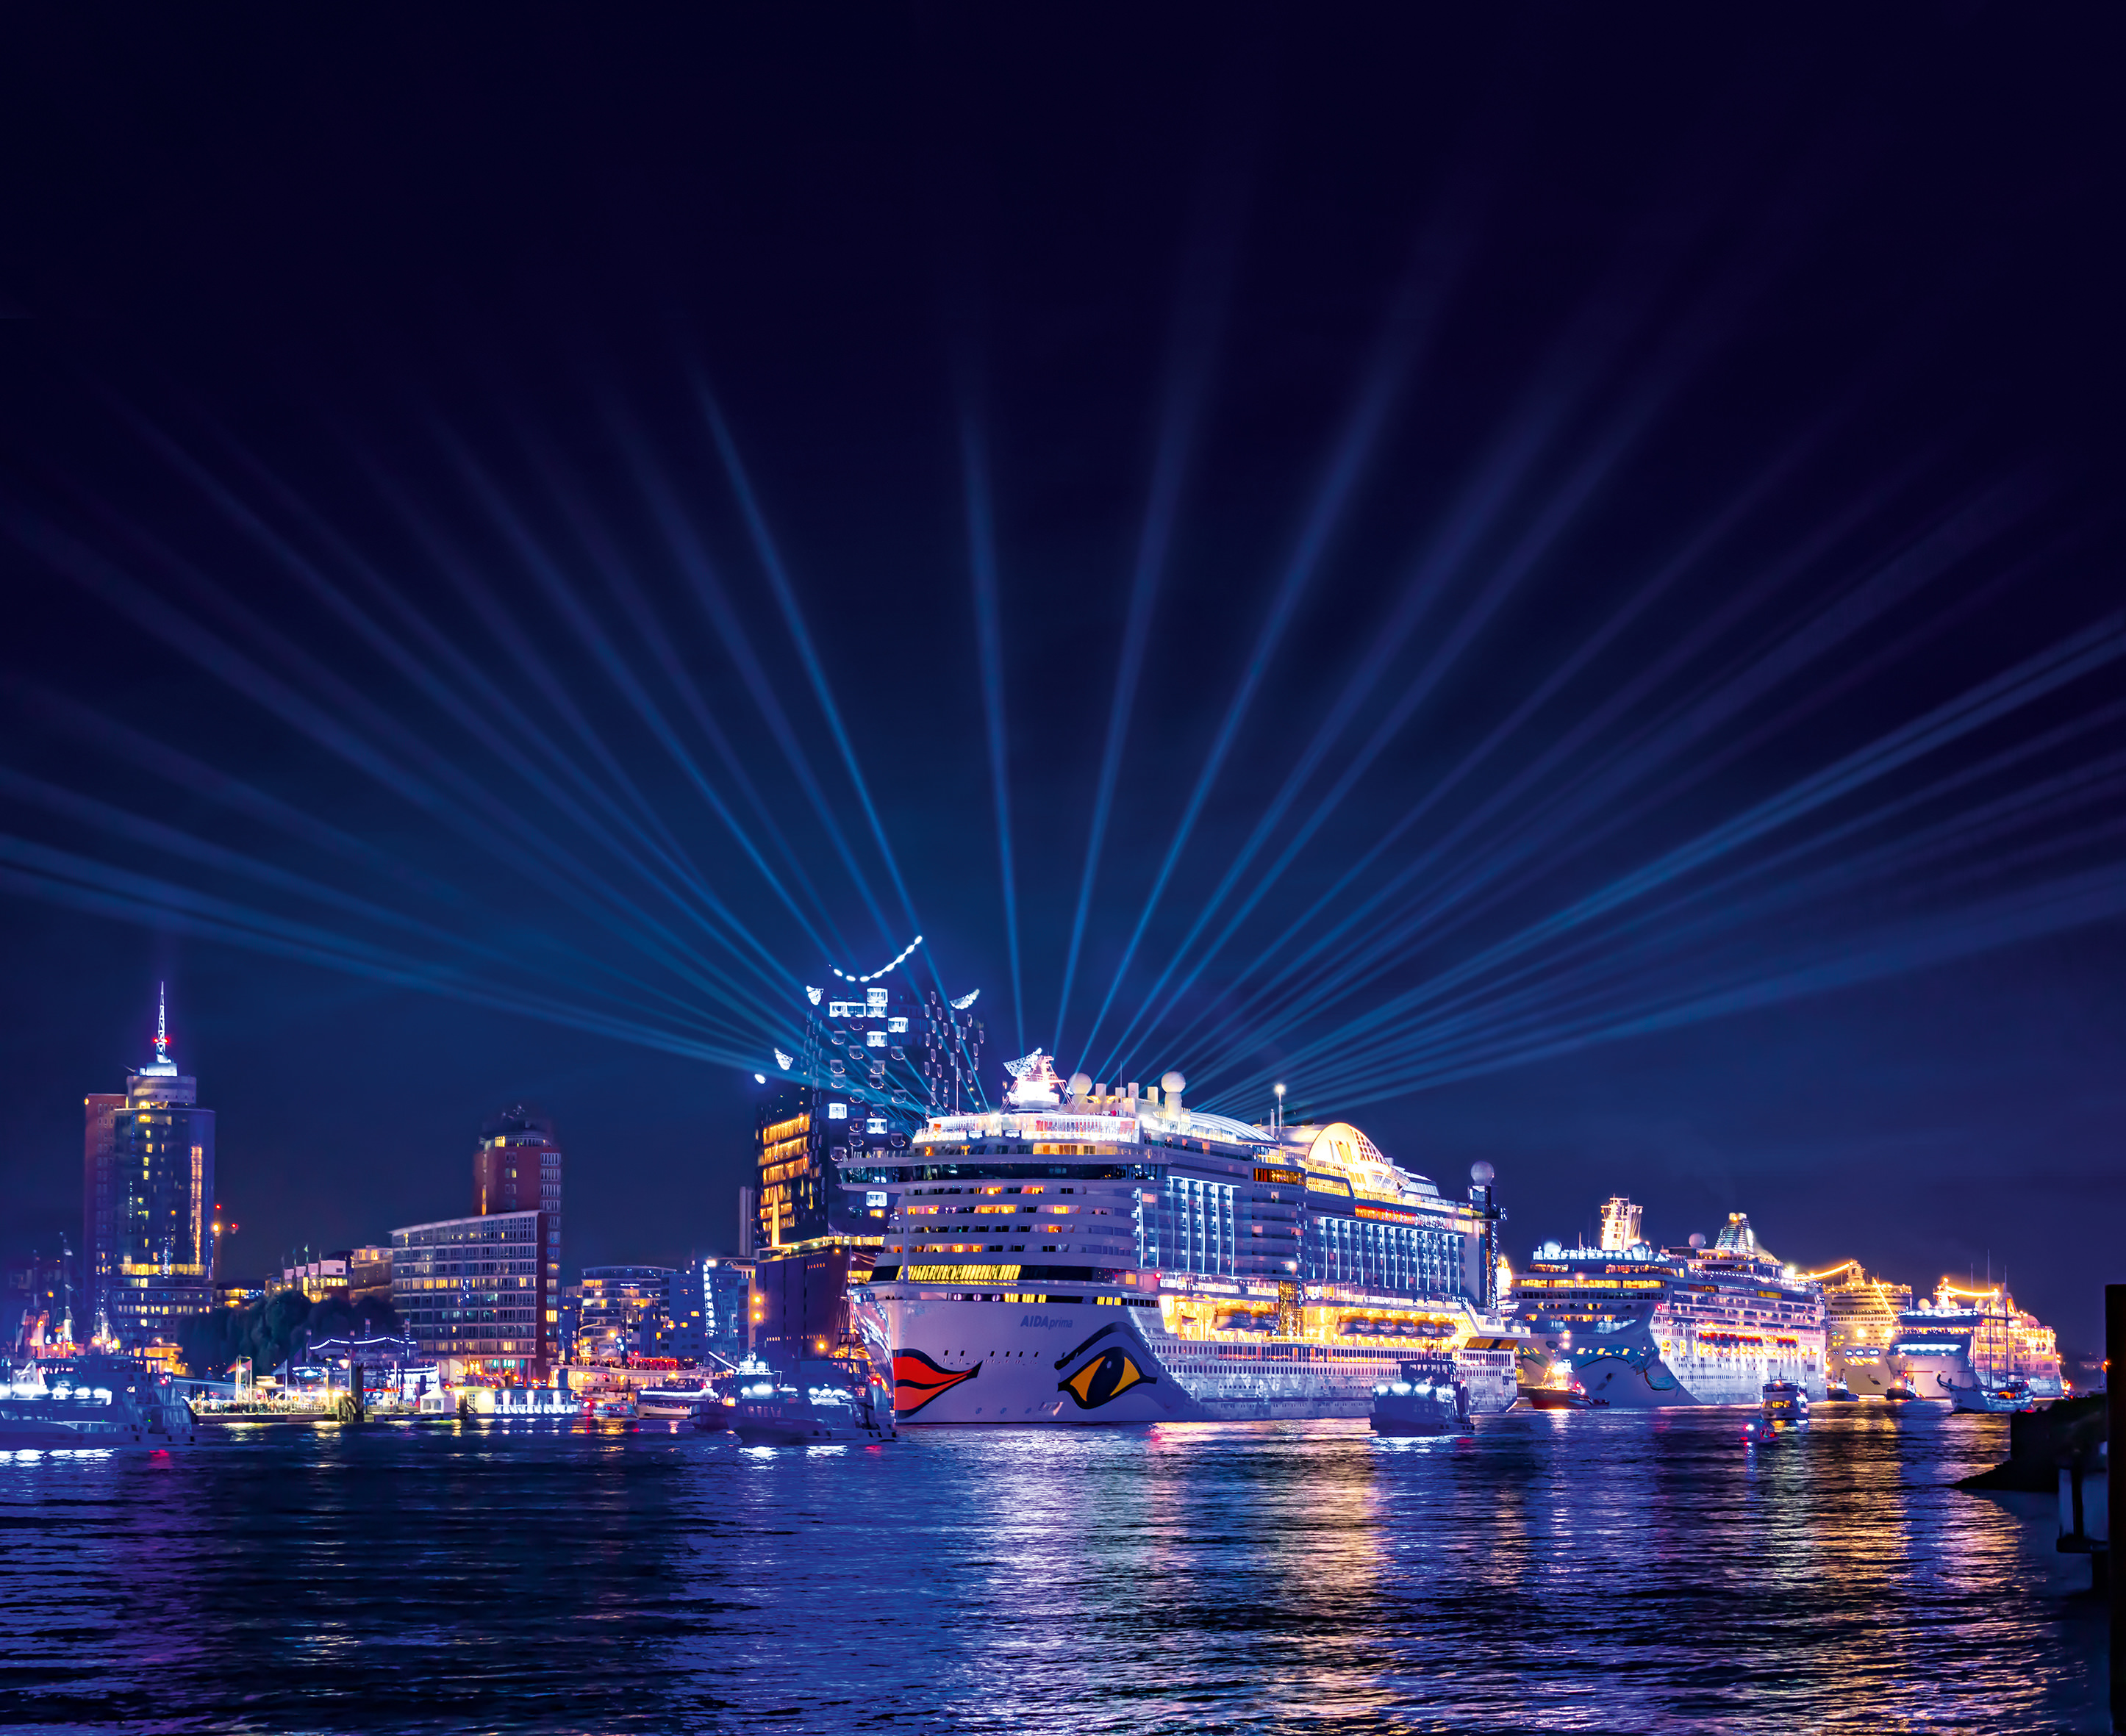 A BREATH-TAKING SPECTACLE: THE GRAND HAMBURG CRUISE DAYS PARADE